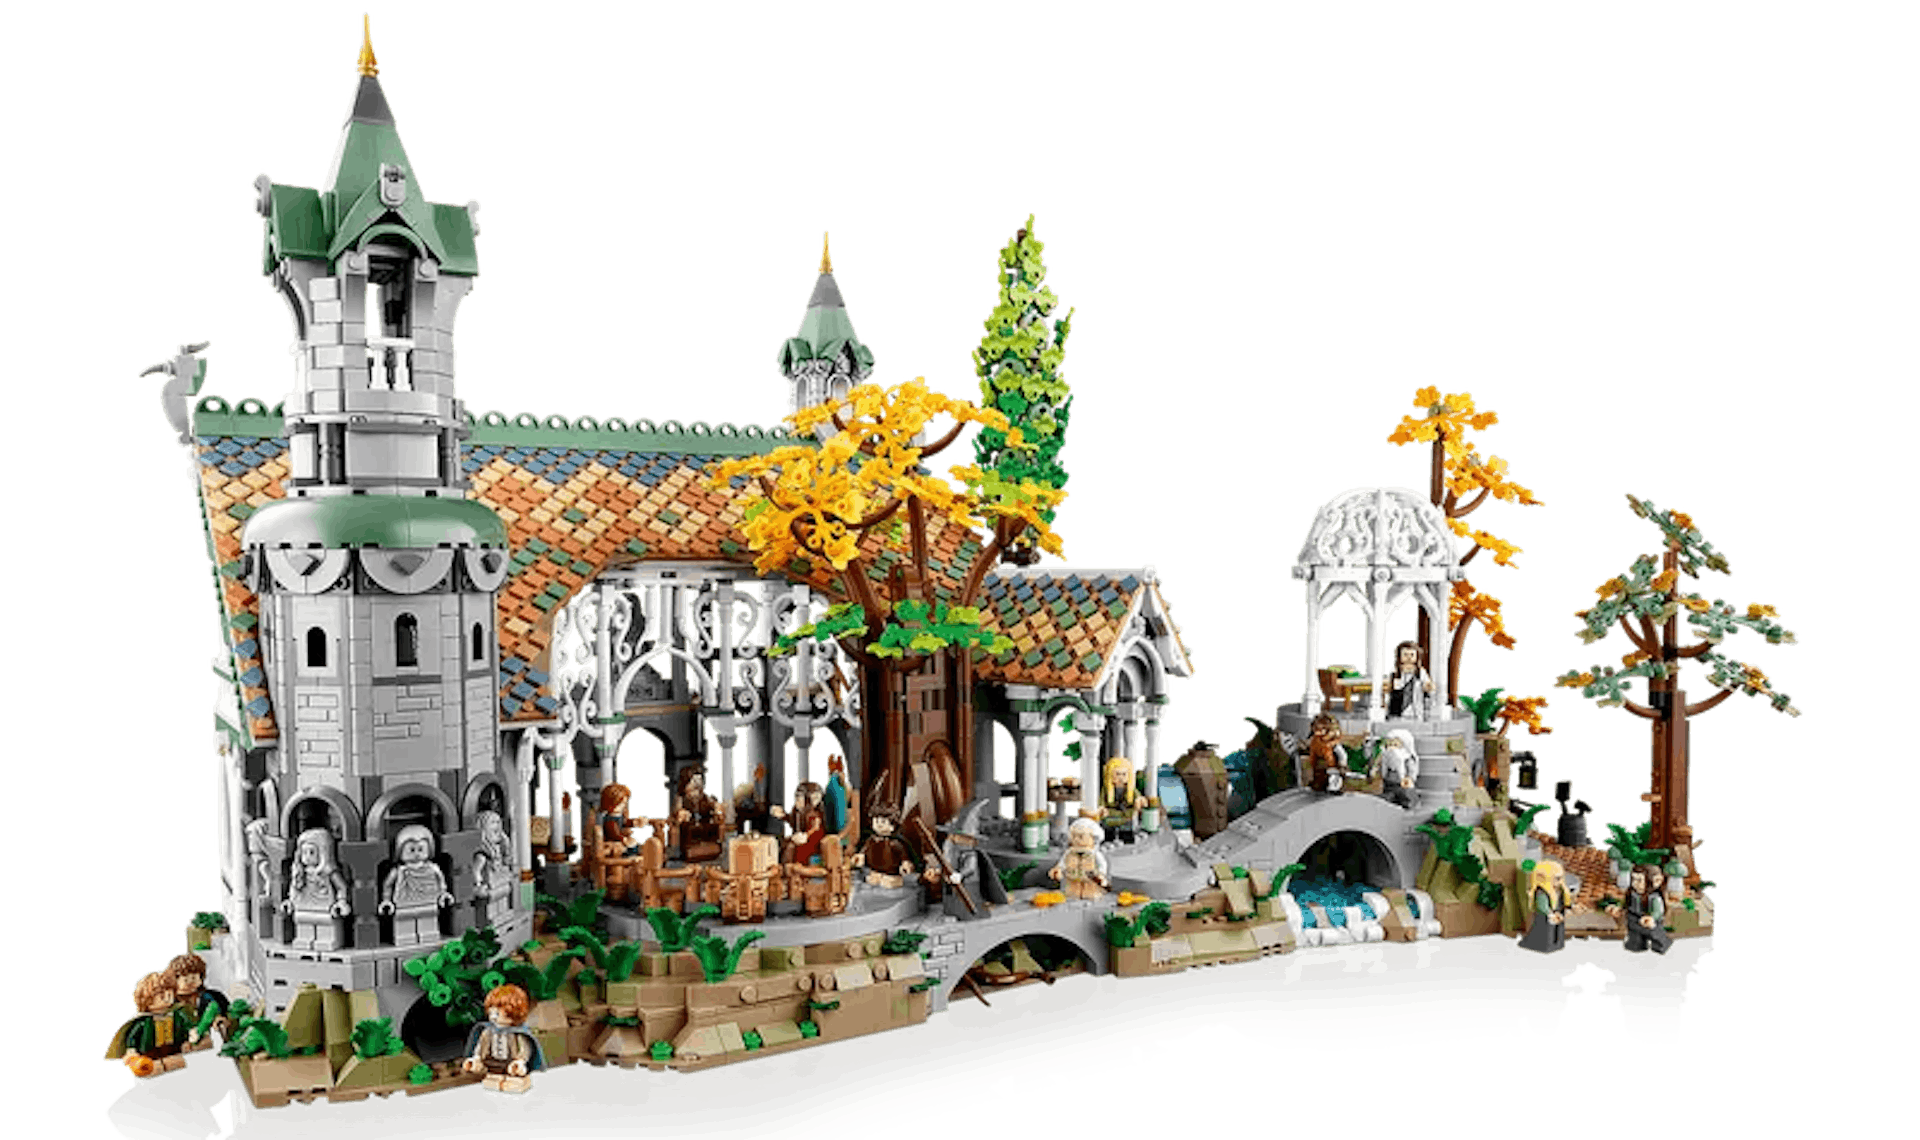 THE LORD OF THE RINGS: RIVENDELL™